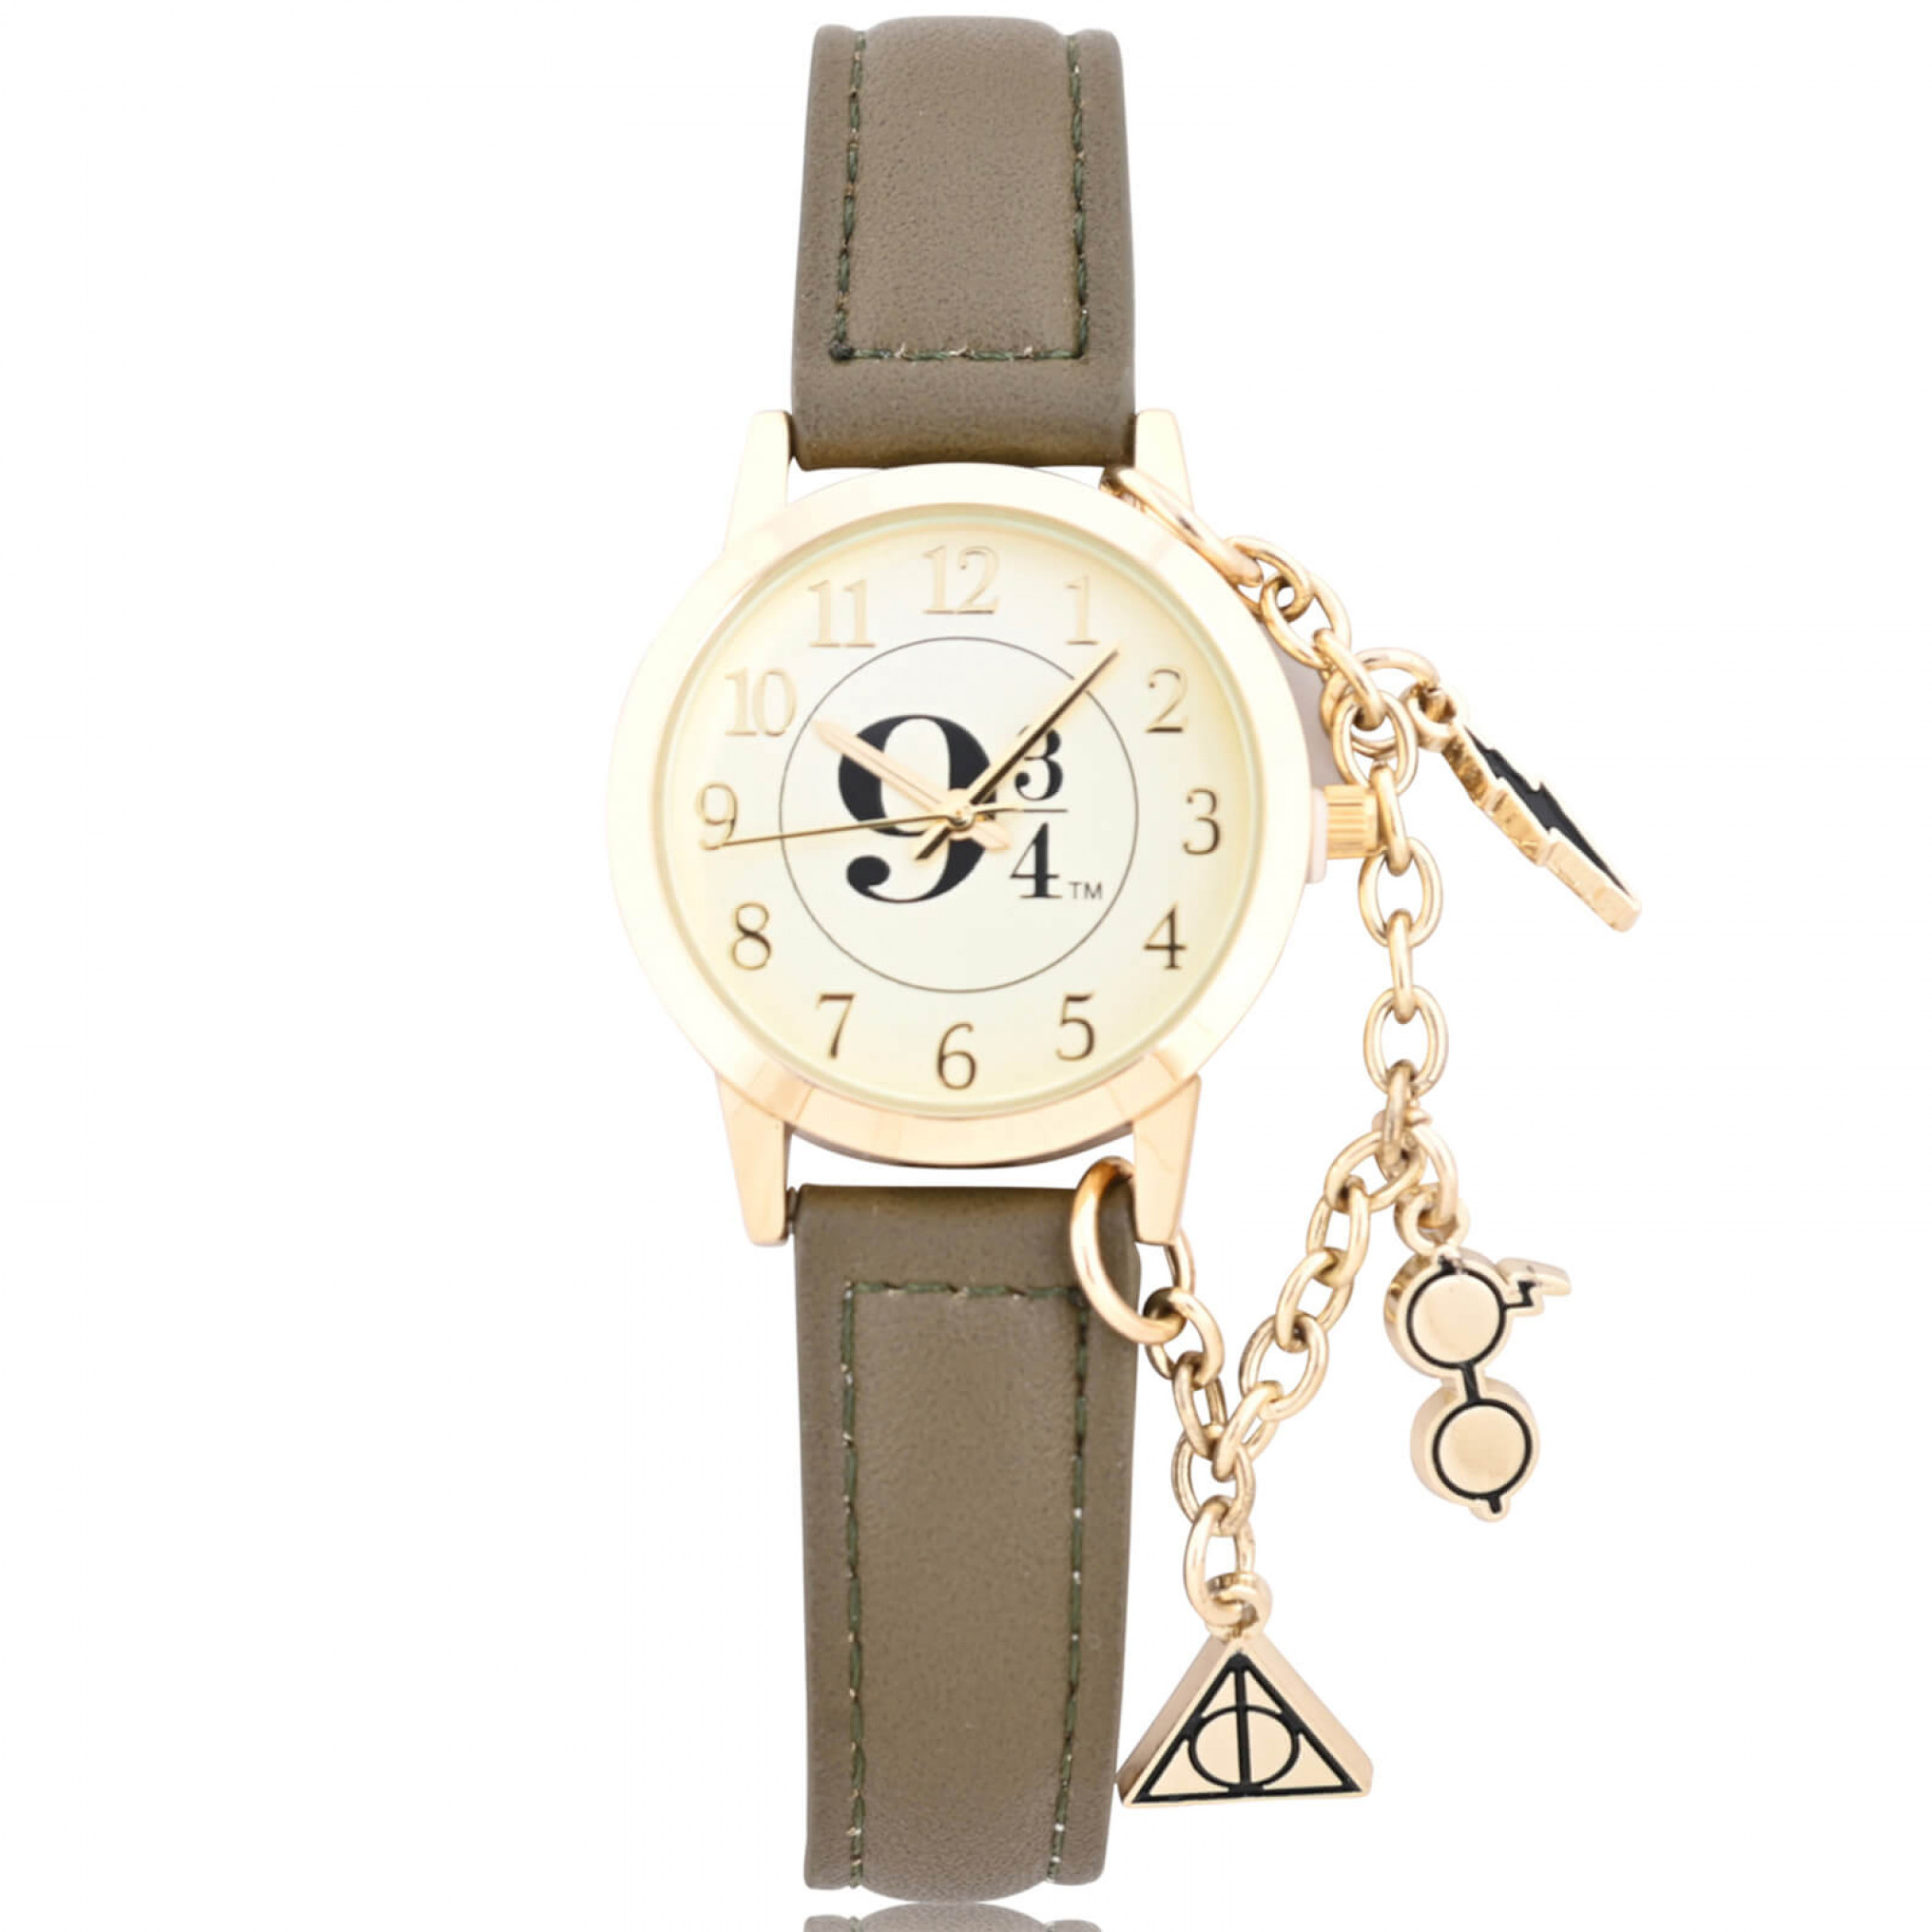 Harry Potter 9 3/4 Watch with Symbol Charms and Faux Leather Band